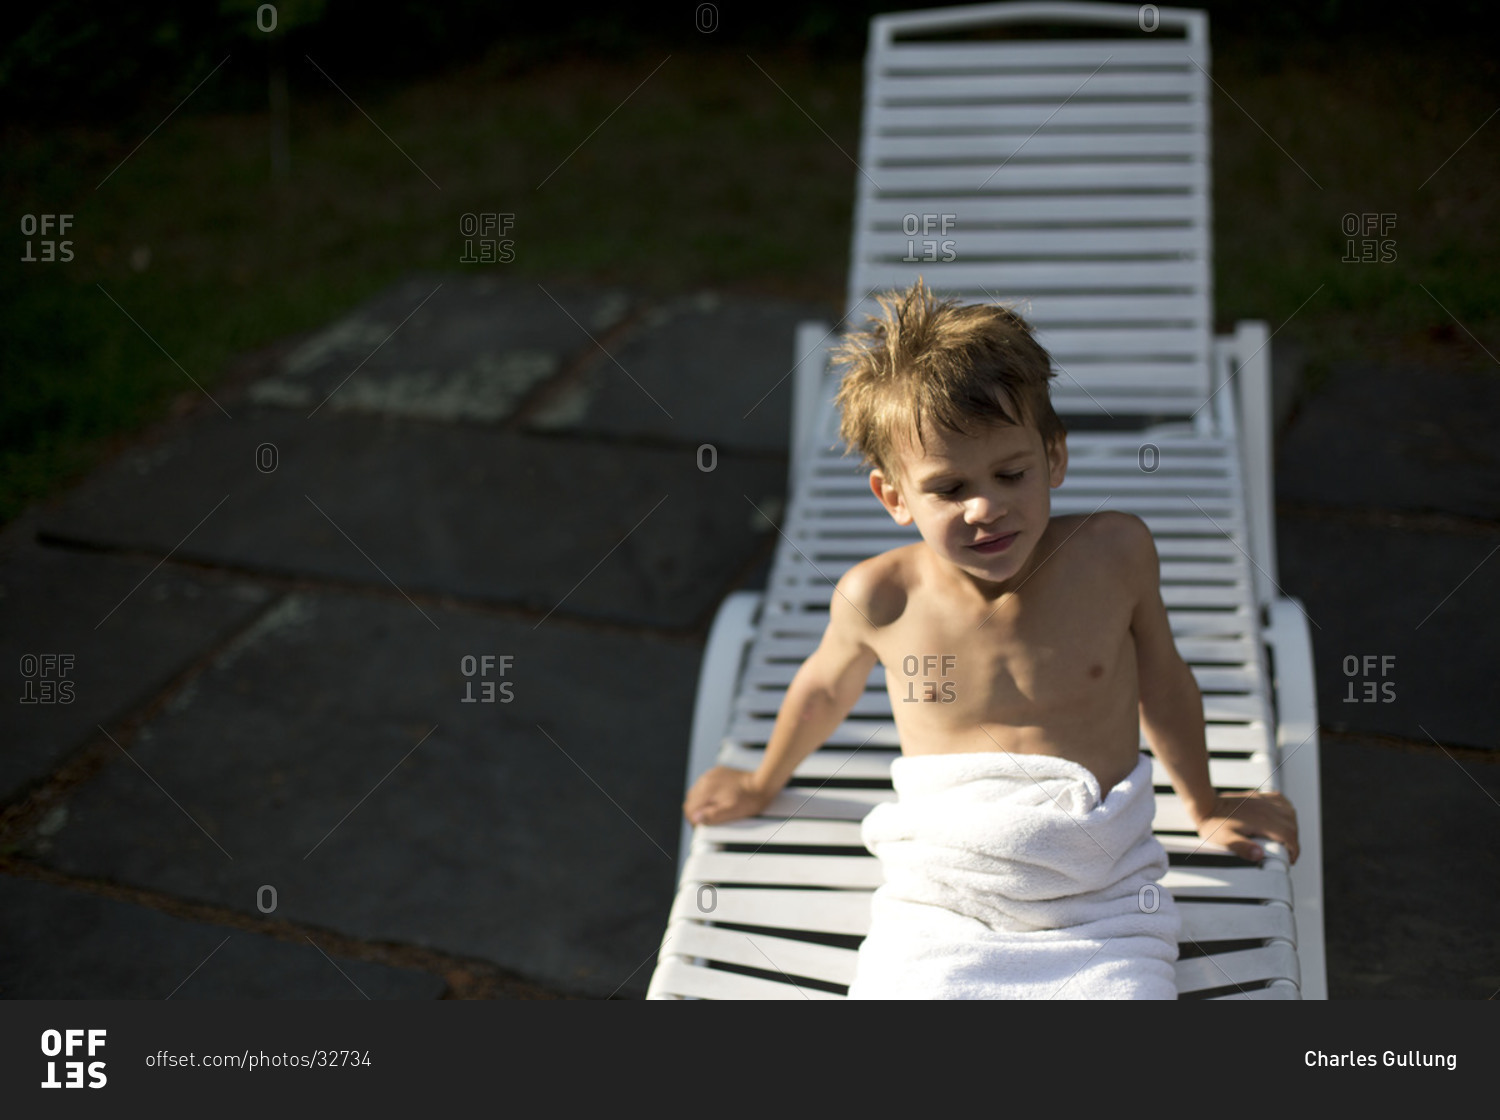 Little boy wrapped in white towel sitting on plastic deck chair.